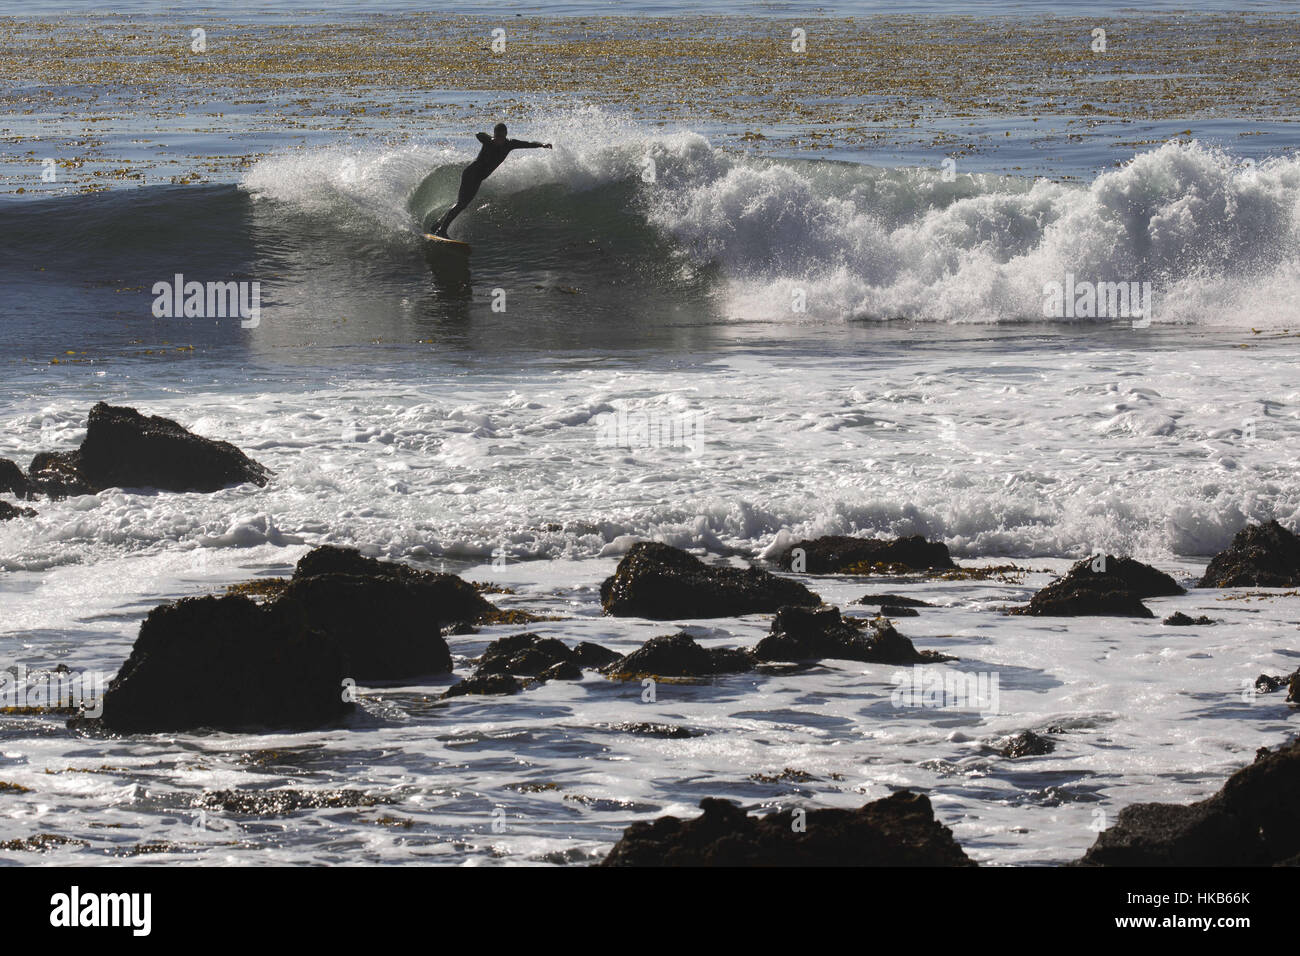 Palos Verdes Estates, CA, USA. 29th Nov, 2016. A man surfs as city contractors demolish a patio built by local surfers on the shoreline of the Pacific Ocean at Lunada Bay on Tuesday, November 29, 2016 in Palos Verdes Estates, Calif. The patio fort was a popular hangout of the Lunada Bay Boys and the process of tearing it down has become a flashpoint in the debate over surfing localism. © 2016 Patrick T. Fallon Credit: Patrick Fallon/ZUMA Wire/Alamy Live News Stock Photo